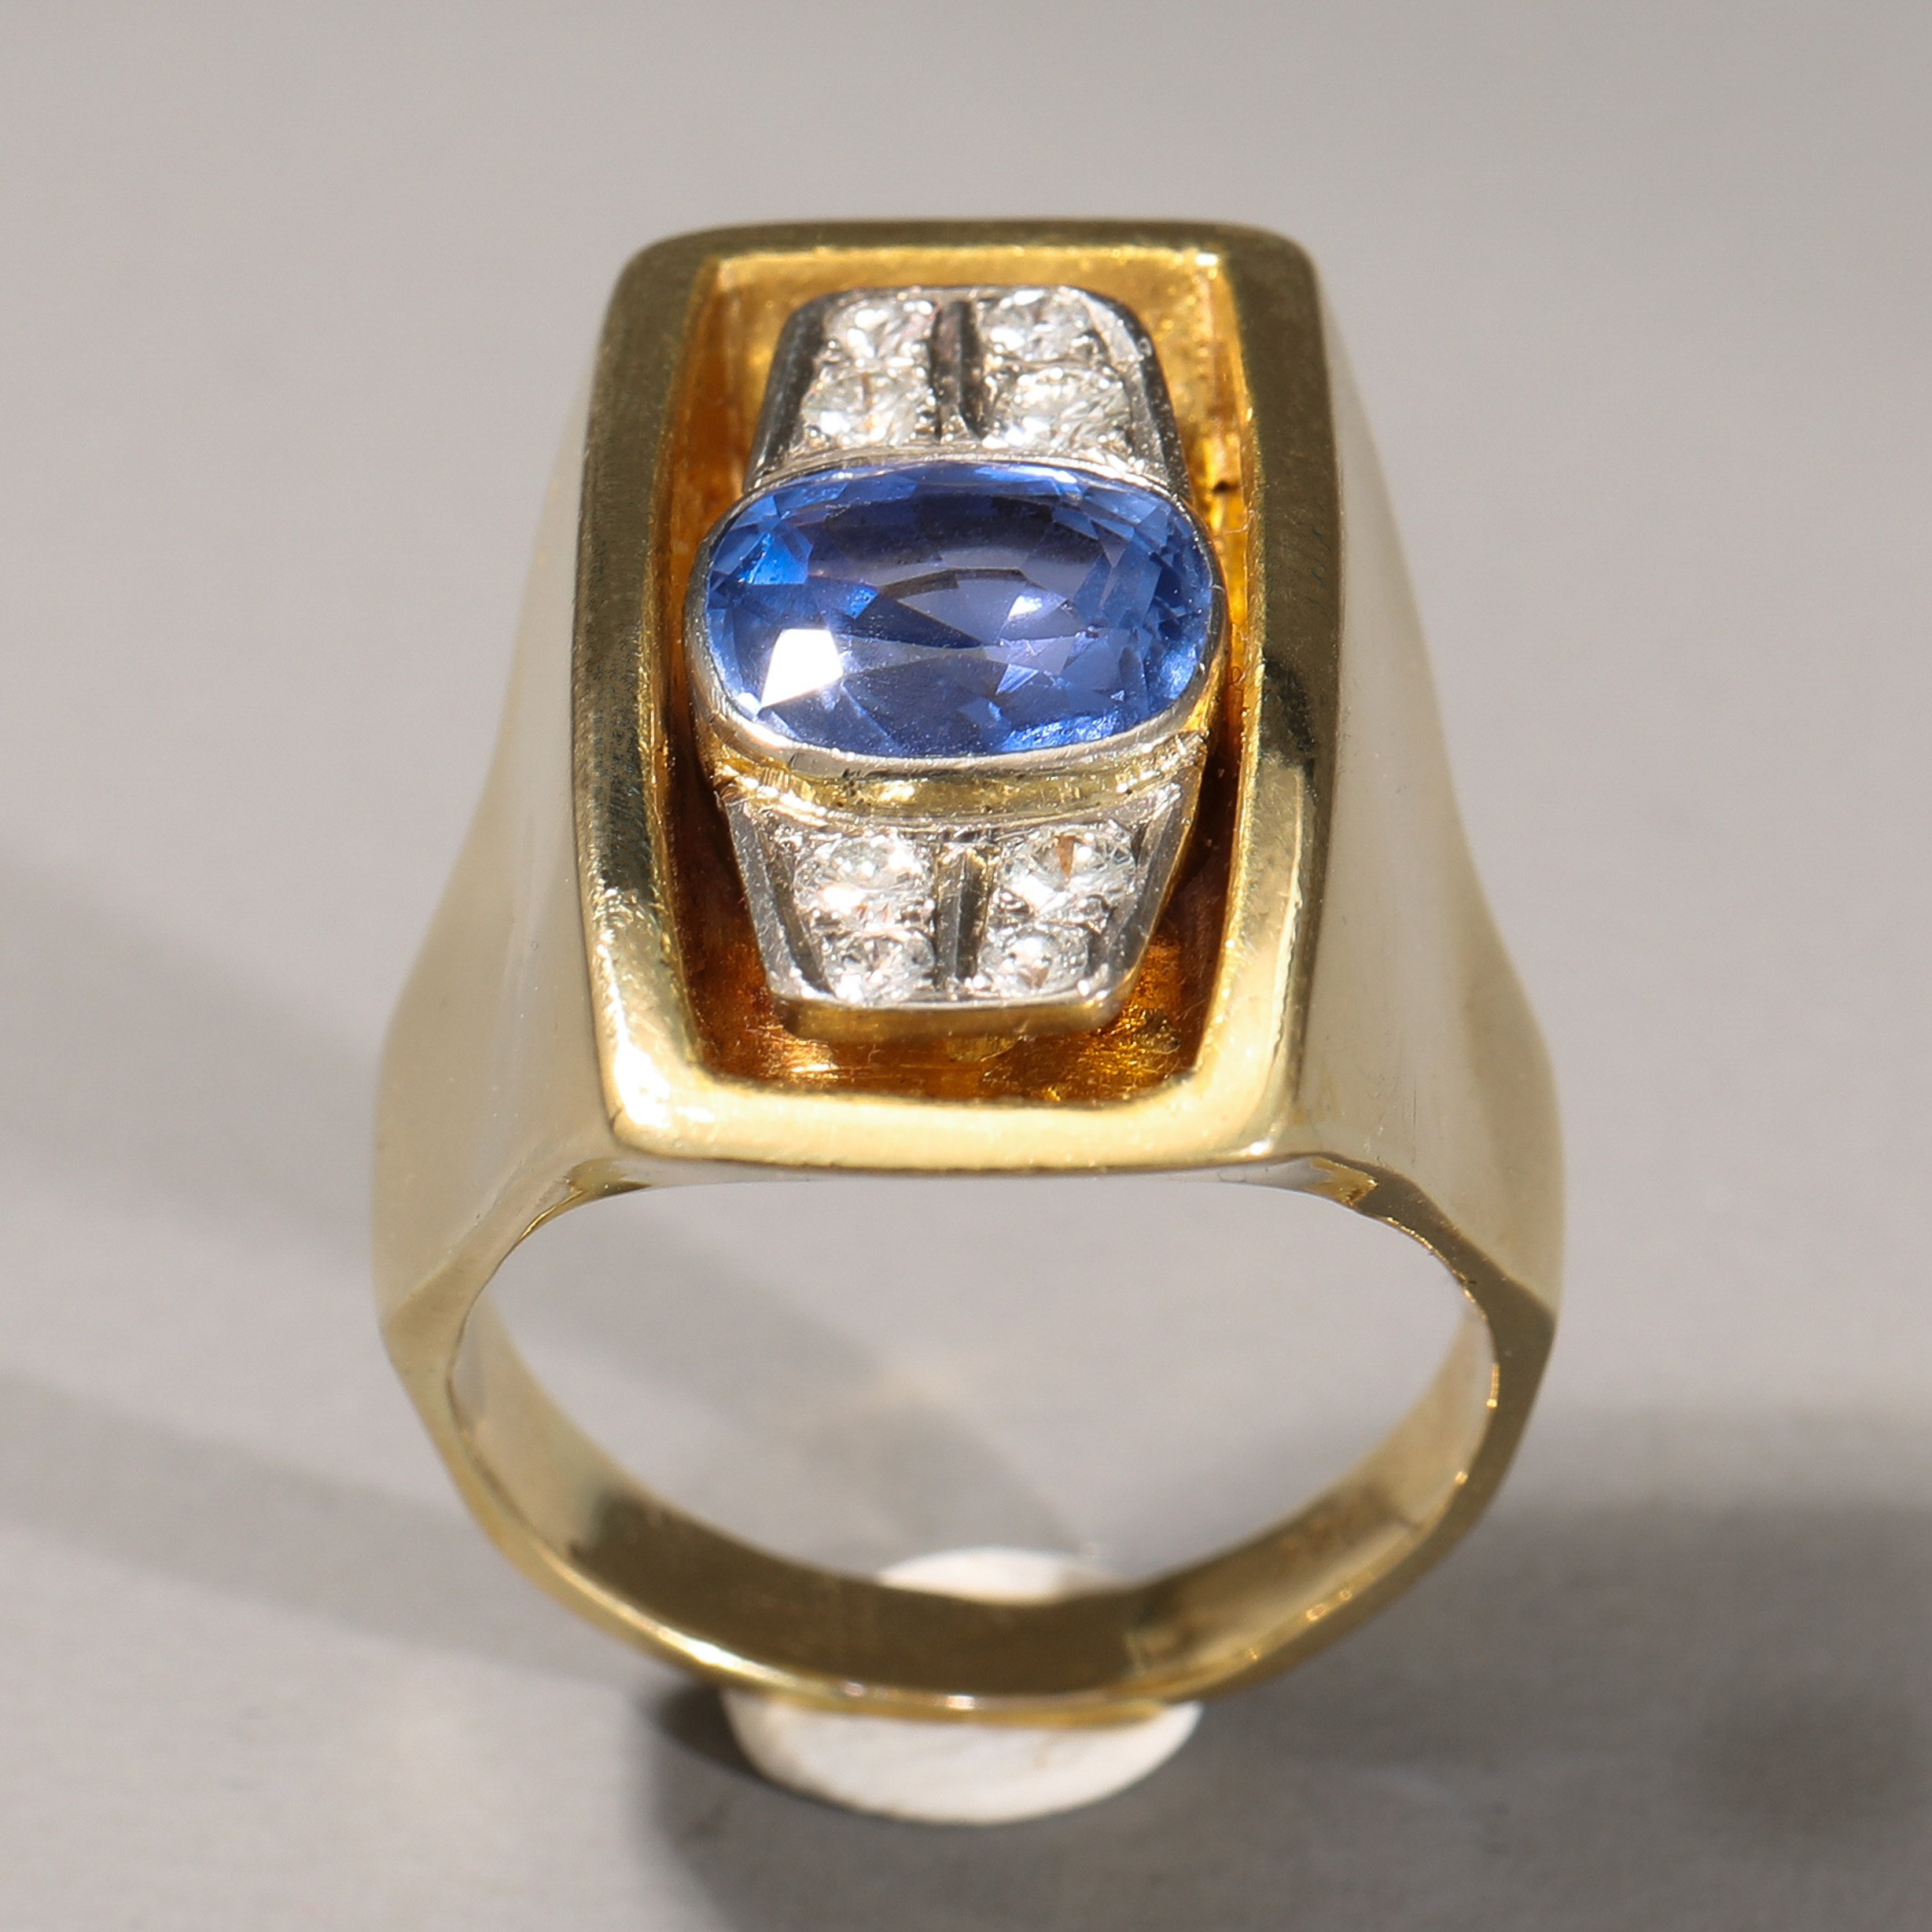 Germany, sapphire ring - Image 2 of 7